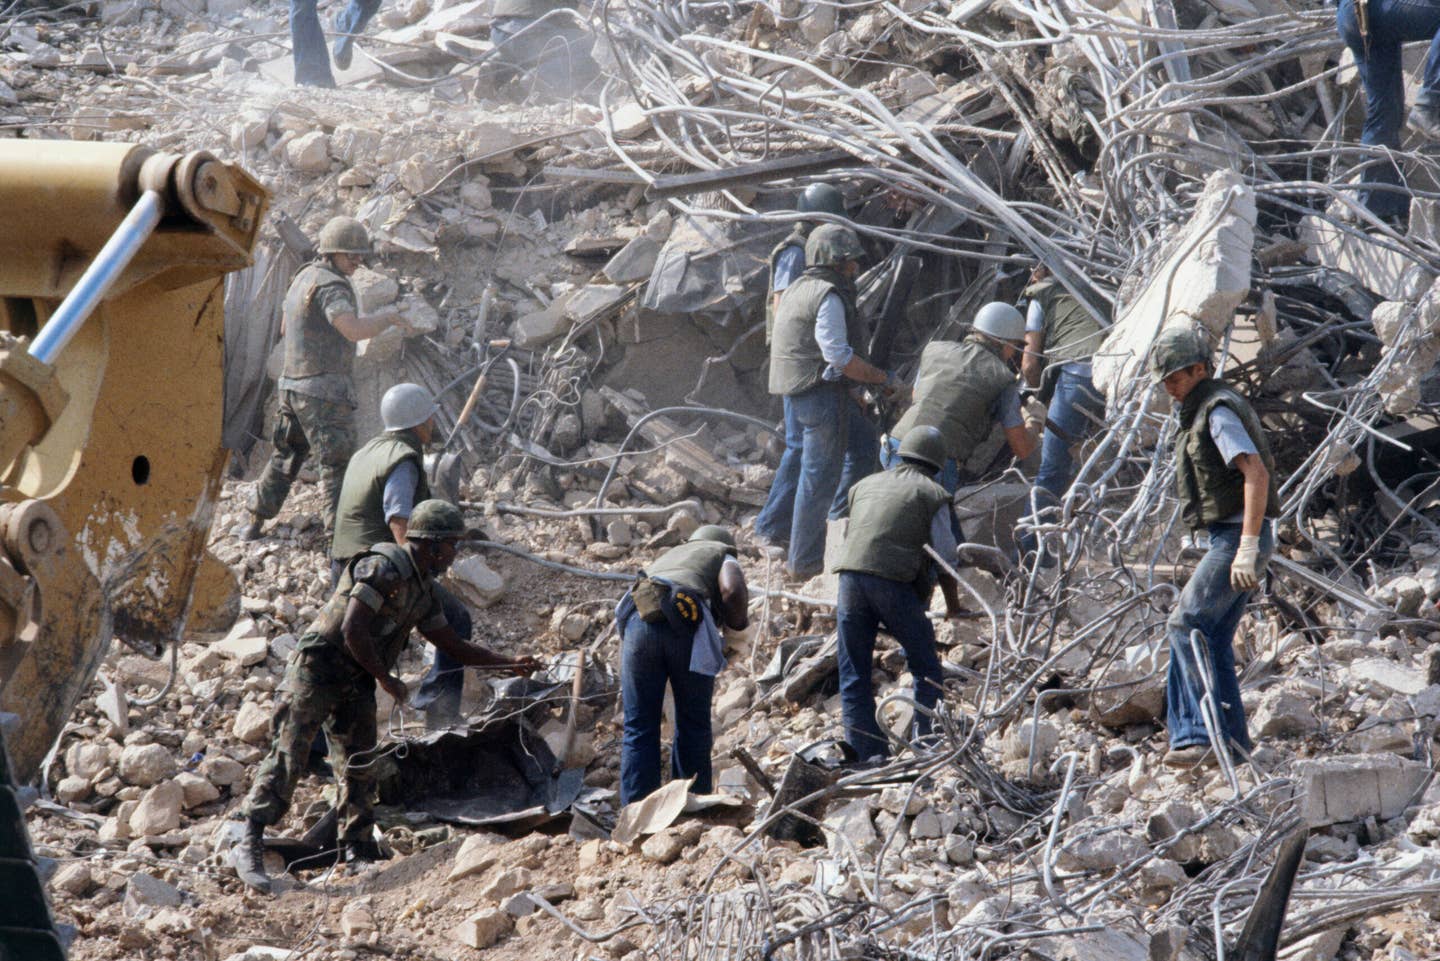 American Marines search for survivors and bodies in the rubble, all that was left of their barracks headquarters in Beirut, after a terrorist suicide car bomb was driven into the building and detonated, killing 241 US servicemen and wounding over 60. (Photo by Peter Charlesworth/LightRocket via Getty Images)